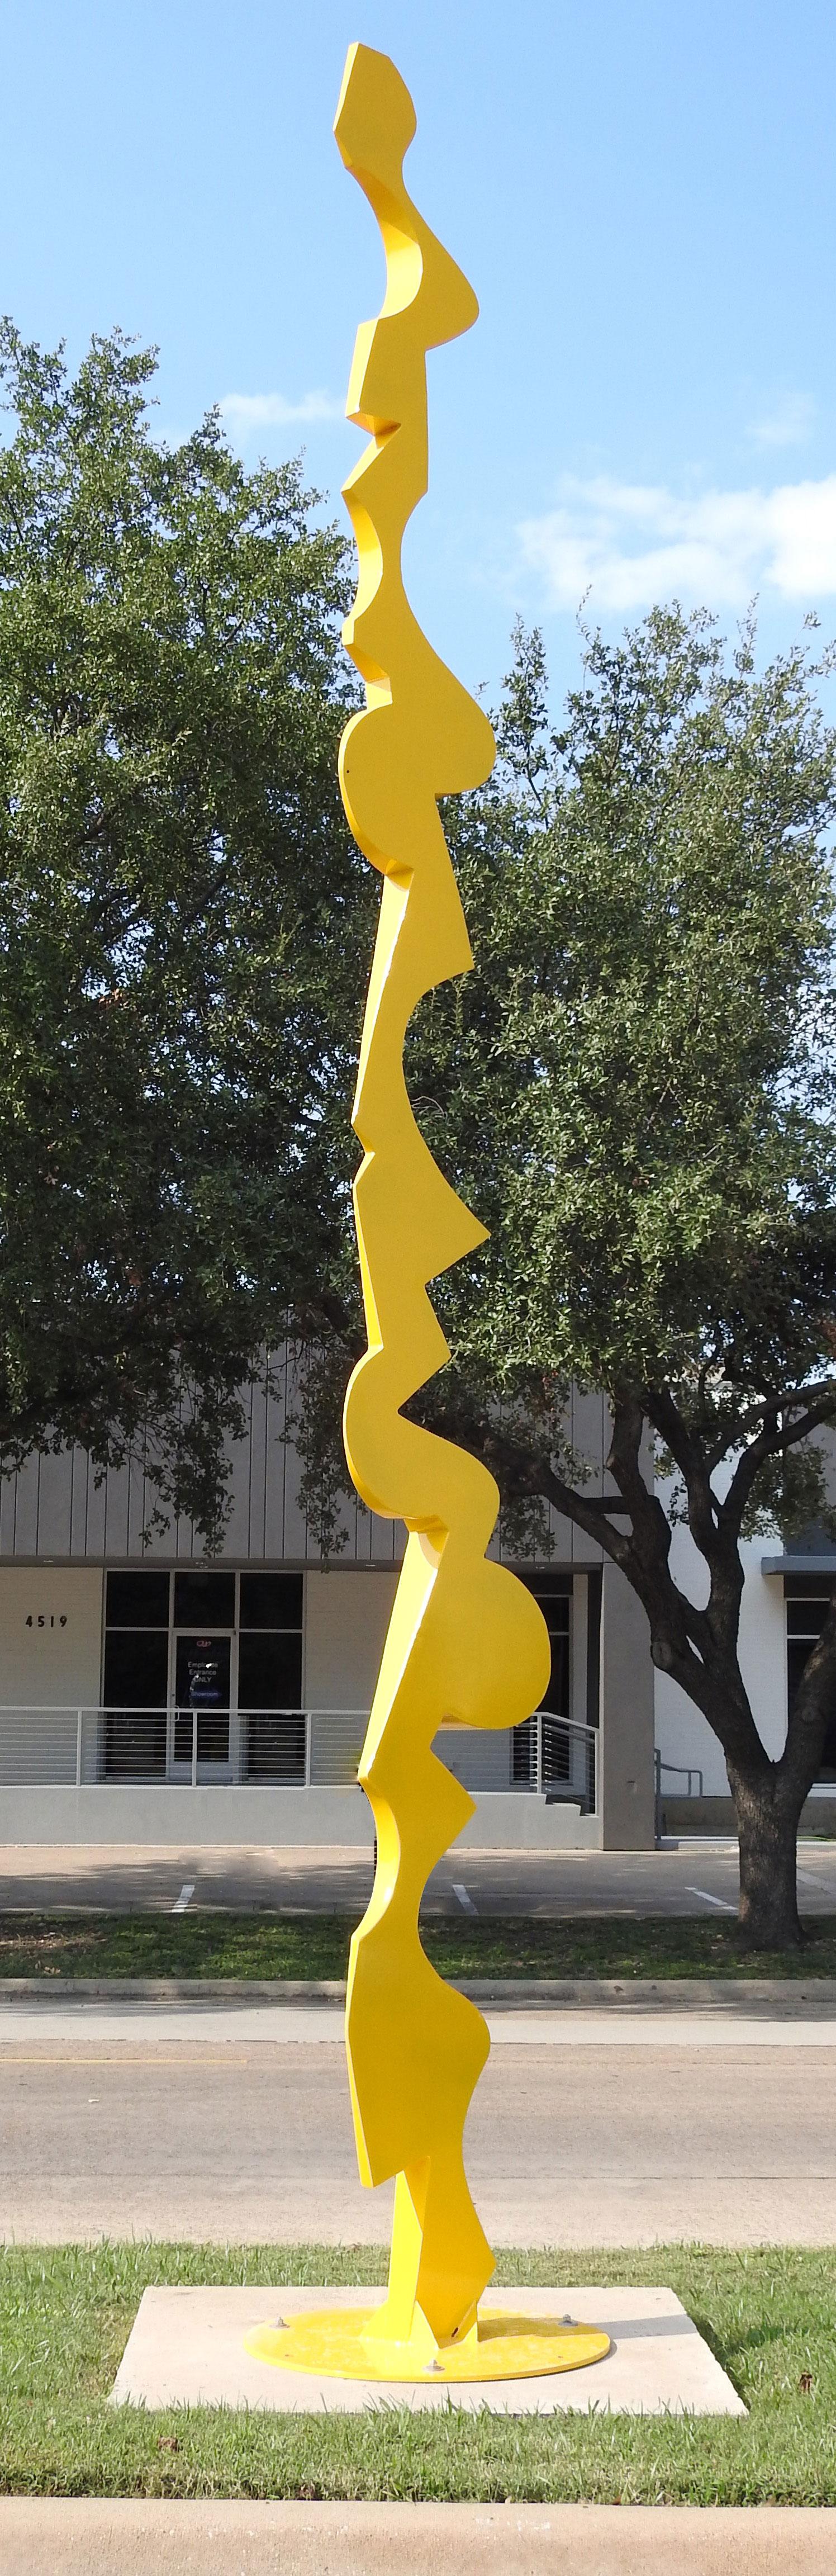 Nic Noblique is a Texas-based sculptor whose preferred medium is steel. Noblique has, in a relatively short amount of time, become one of the foremost abstract sculptors in the United States. This Yellow Wavy Steel Sculpture will elevate the